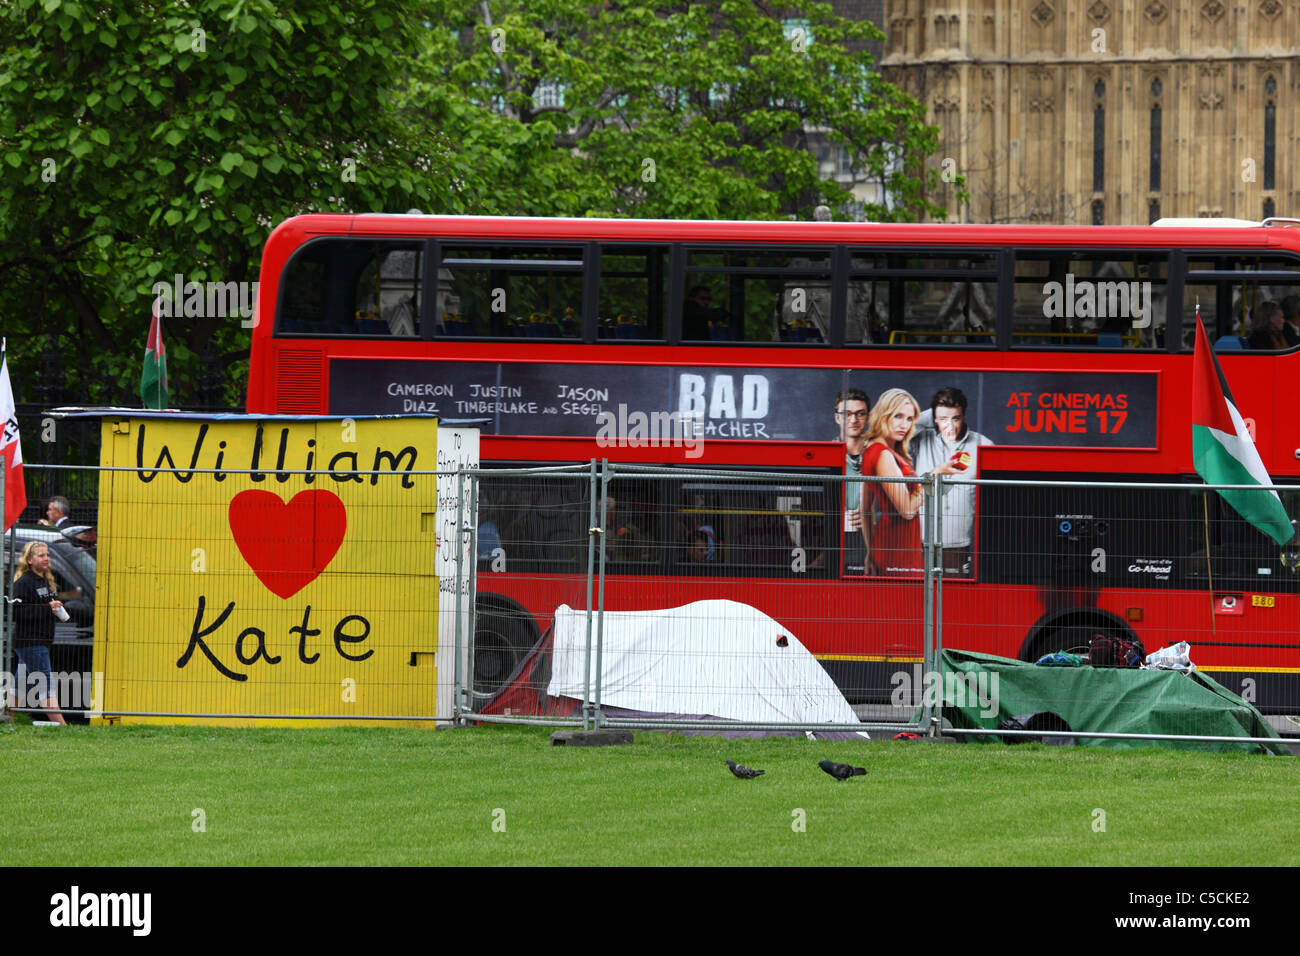 William Loves Kate banner, red bus advertising Bad Teacher movie behind, Parliament Square, Westminster, London, England Stock Photo